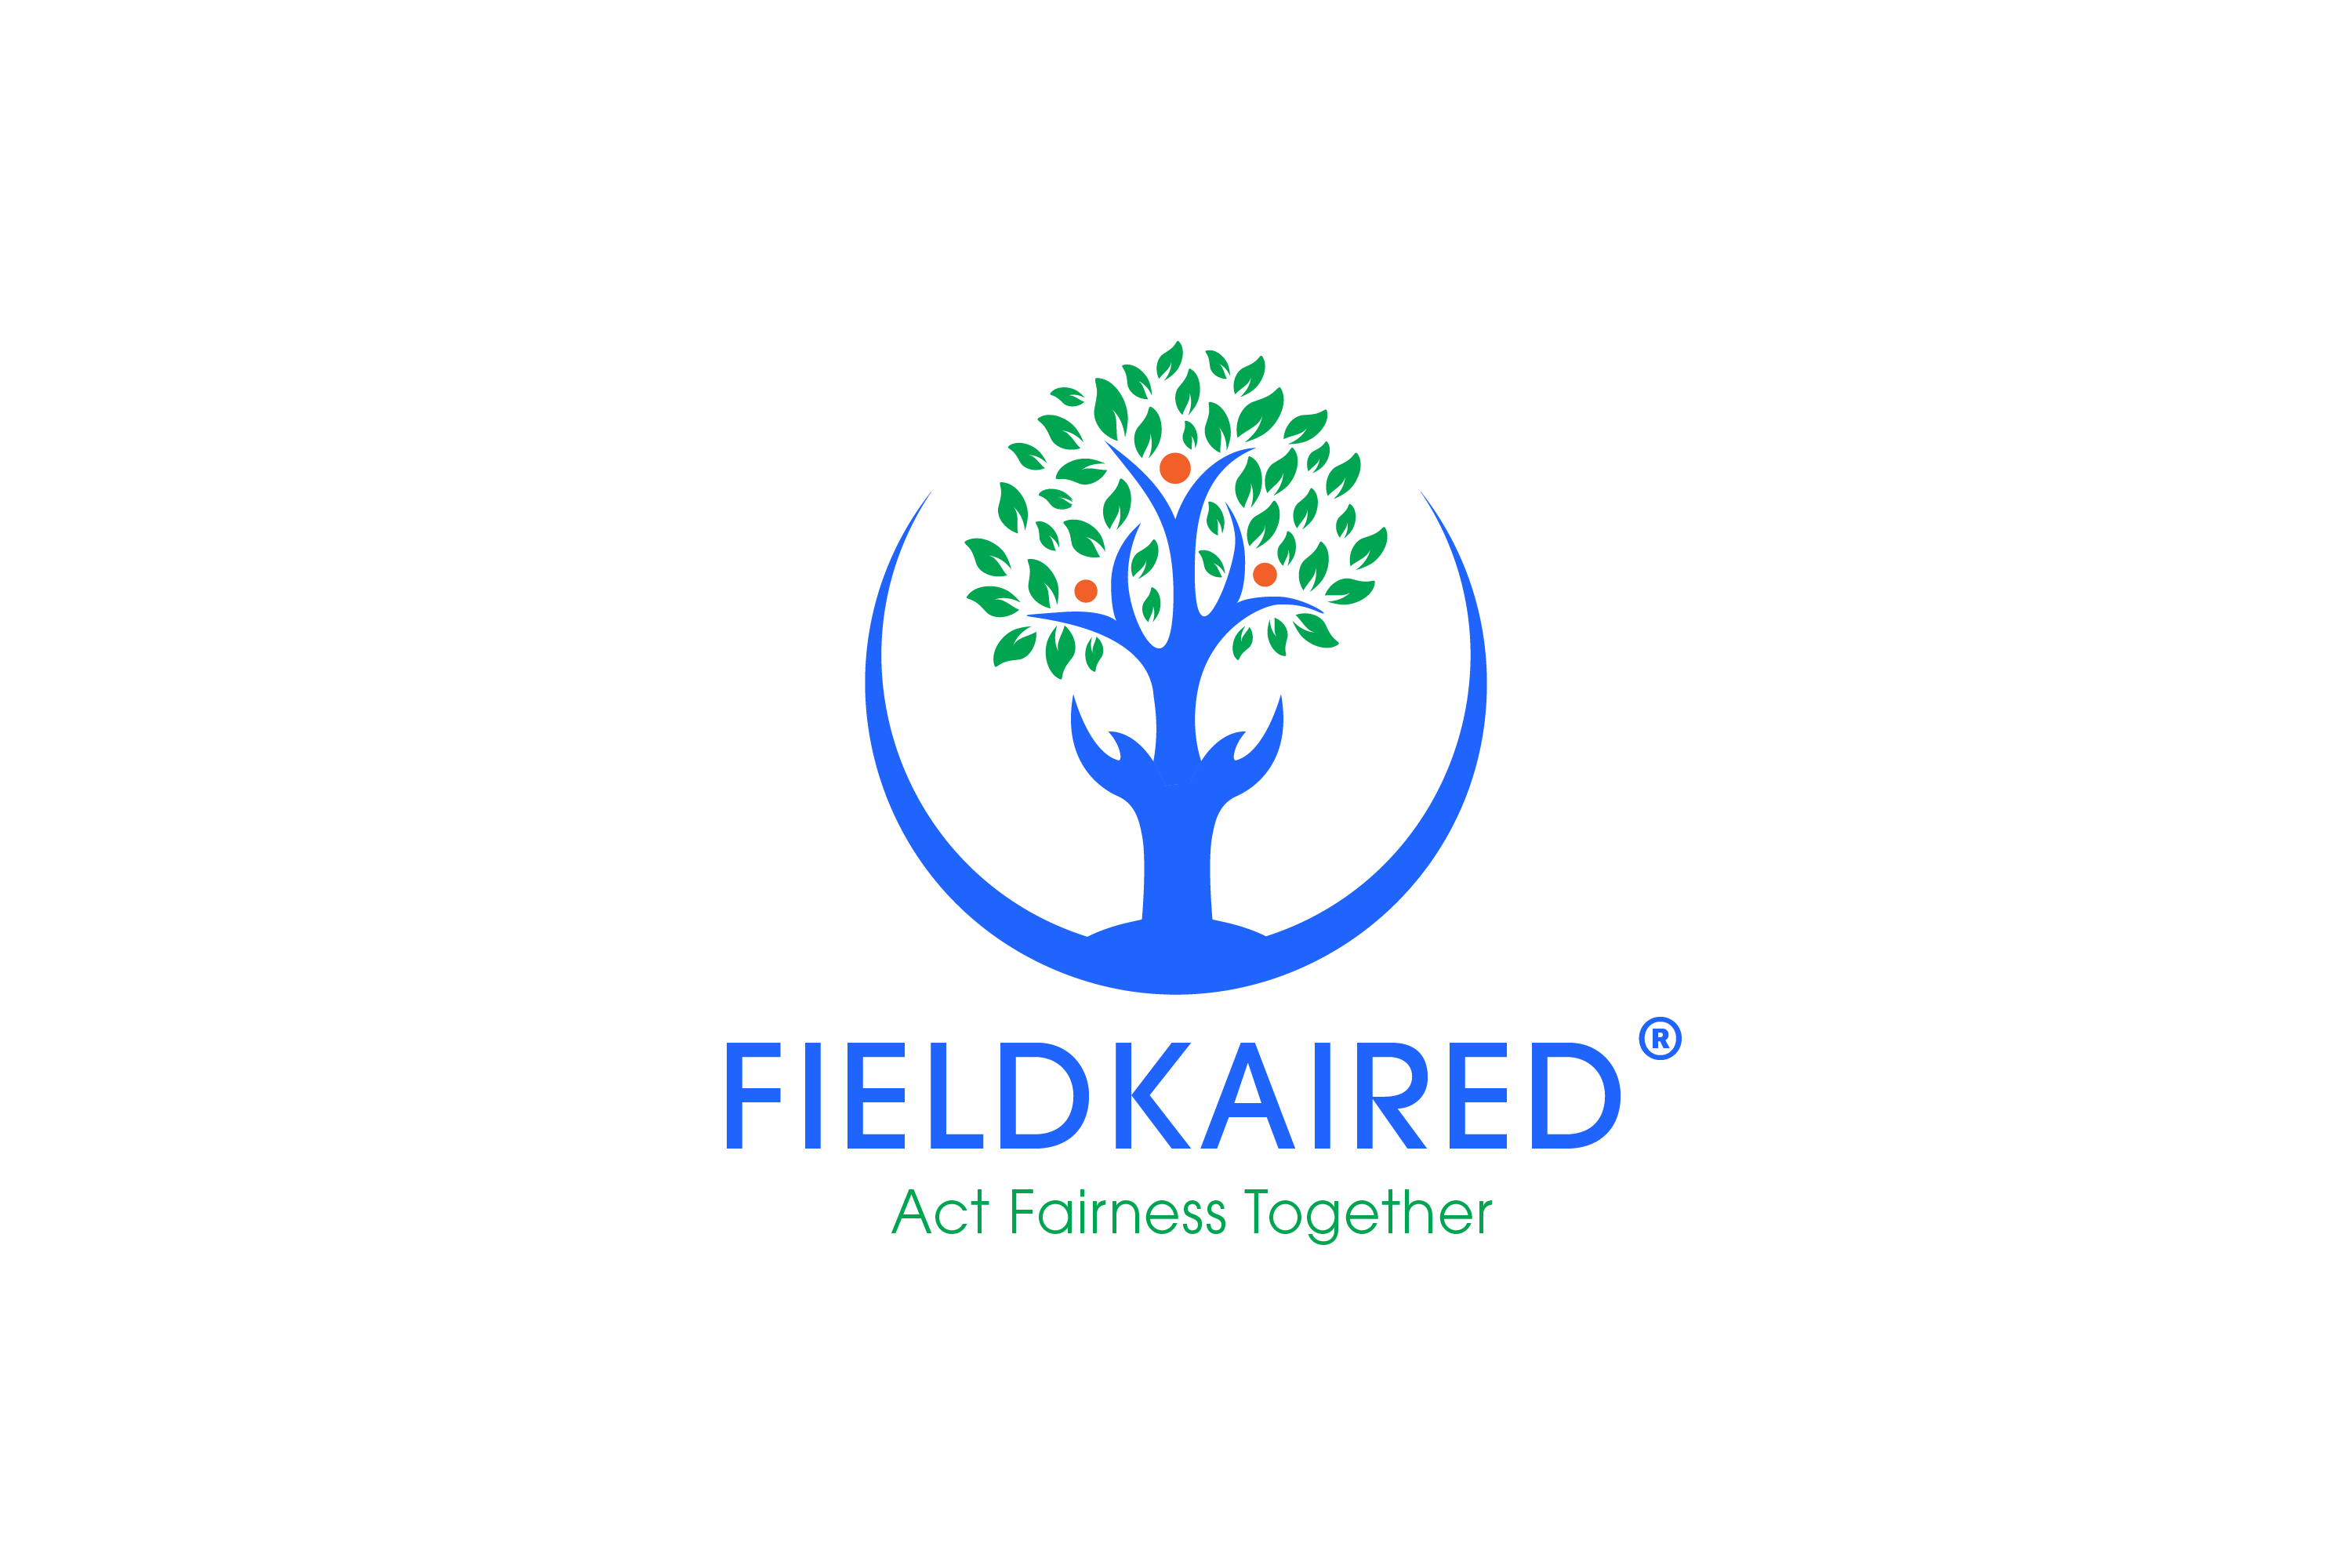 Fieldkaired logo - a blend of lush green and technology motifs, symbolizing advanced agricultural solutions.